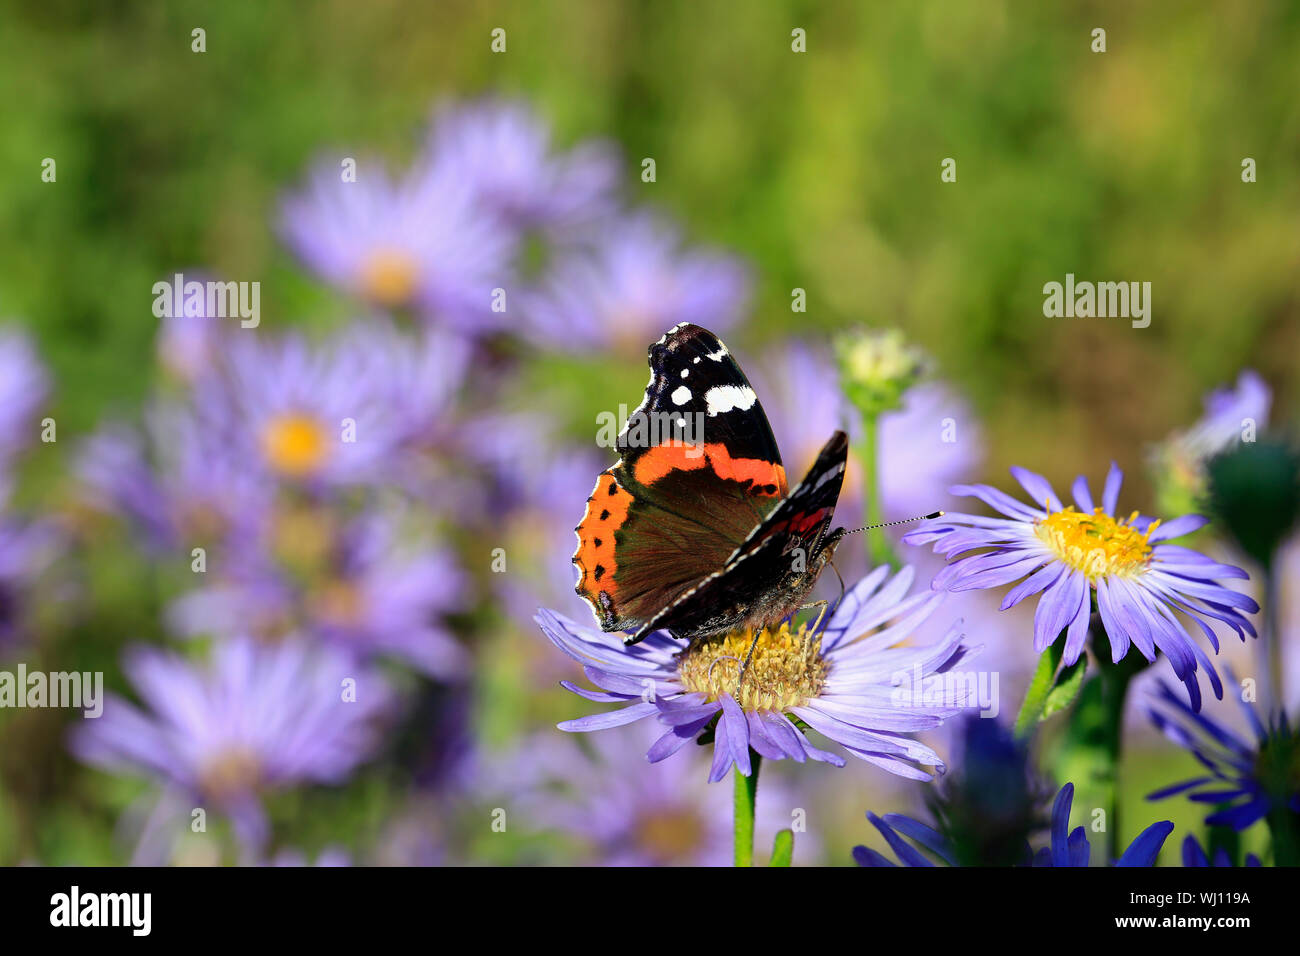 Red Admiral butterfly, Vanessa atalanta, feeding on New York Asters, Symphyotrichum novi-belgii on a day of autumn in Finland. Selective focus. Stock Photo